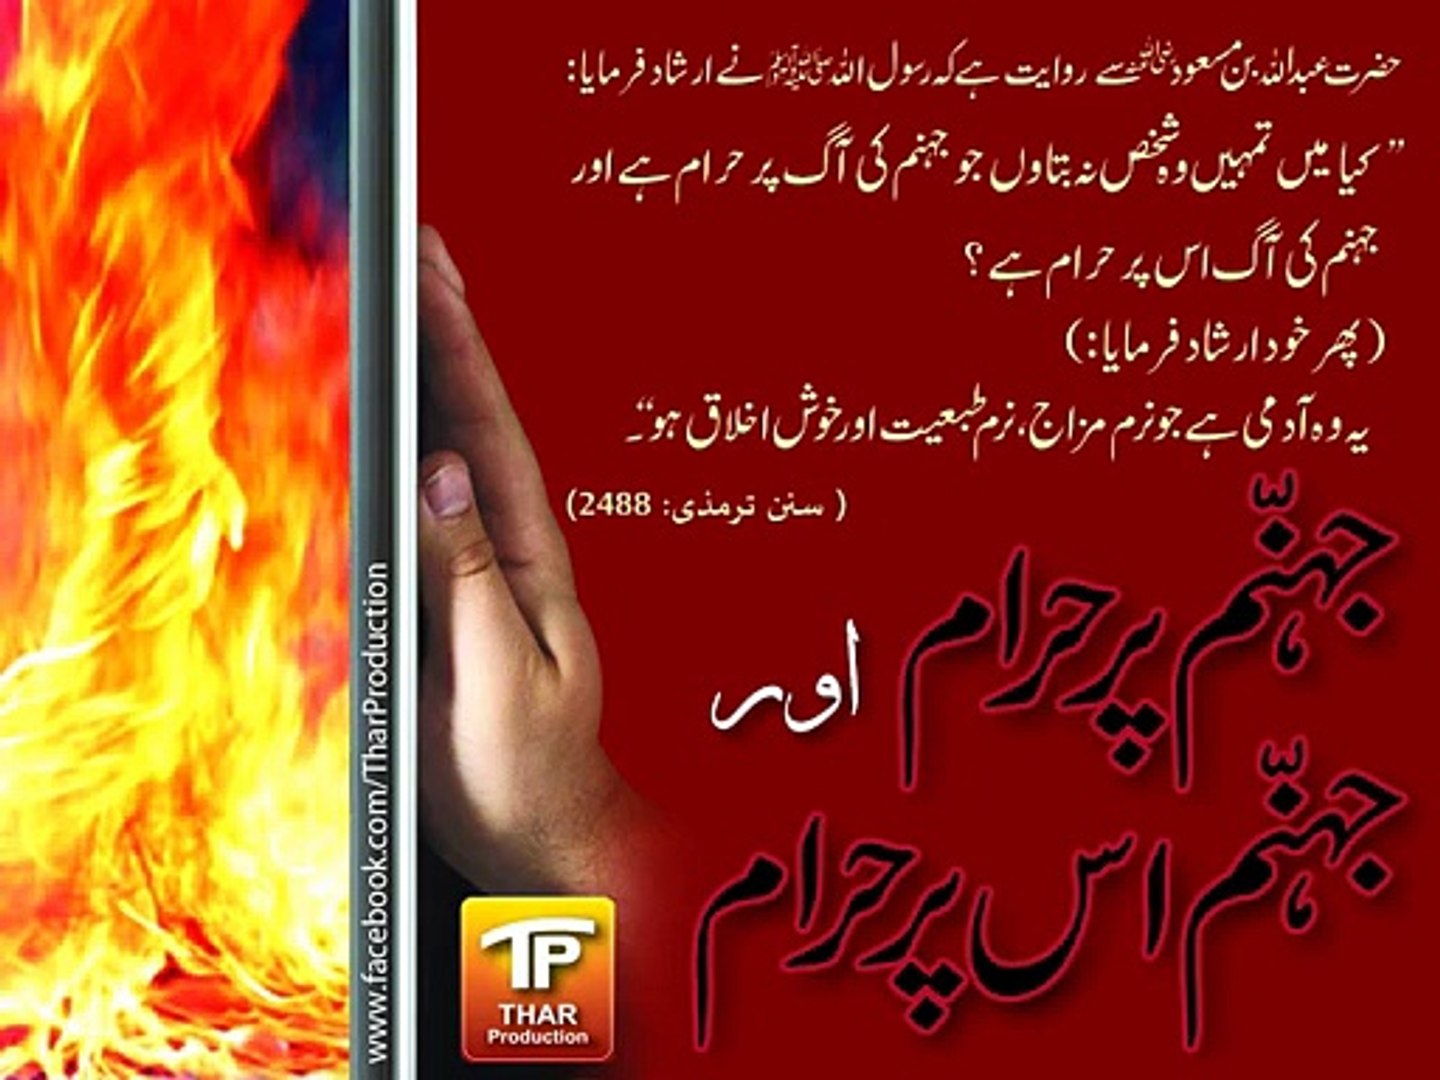 Jahannum Haraam Islamic Quotes Achi Baatein Thar Production Video Dailymotion